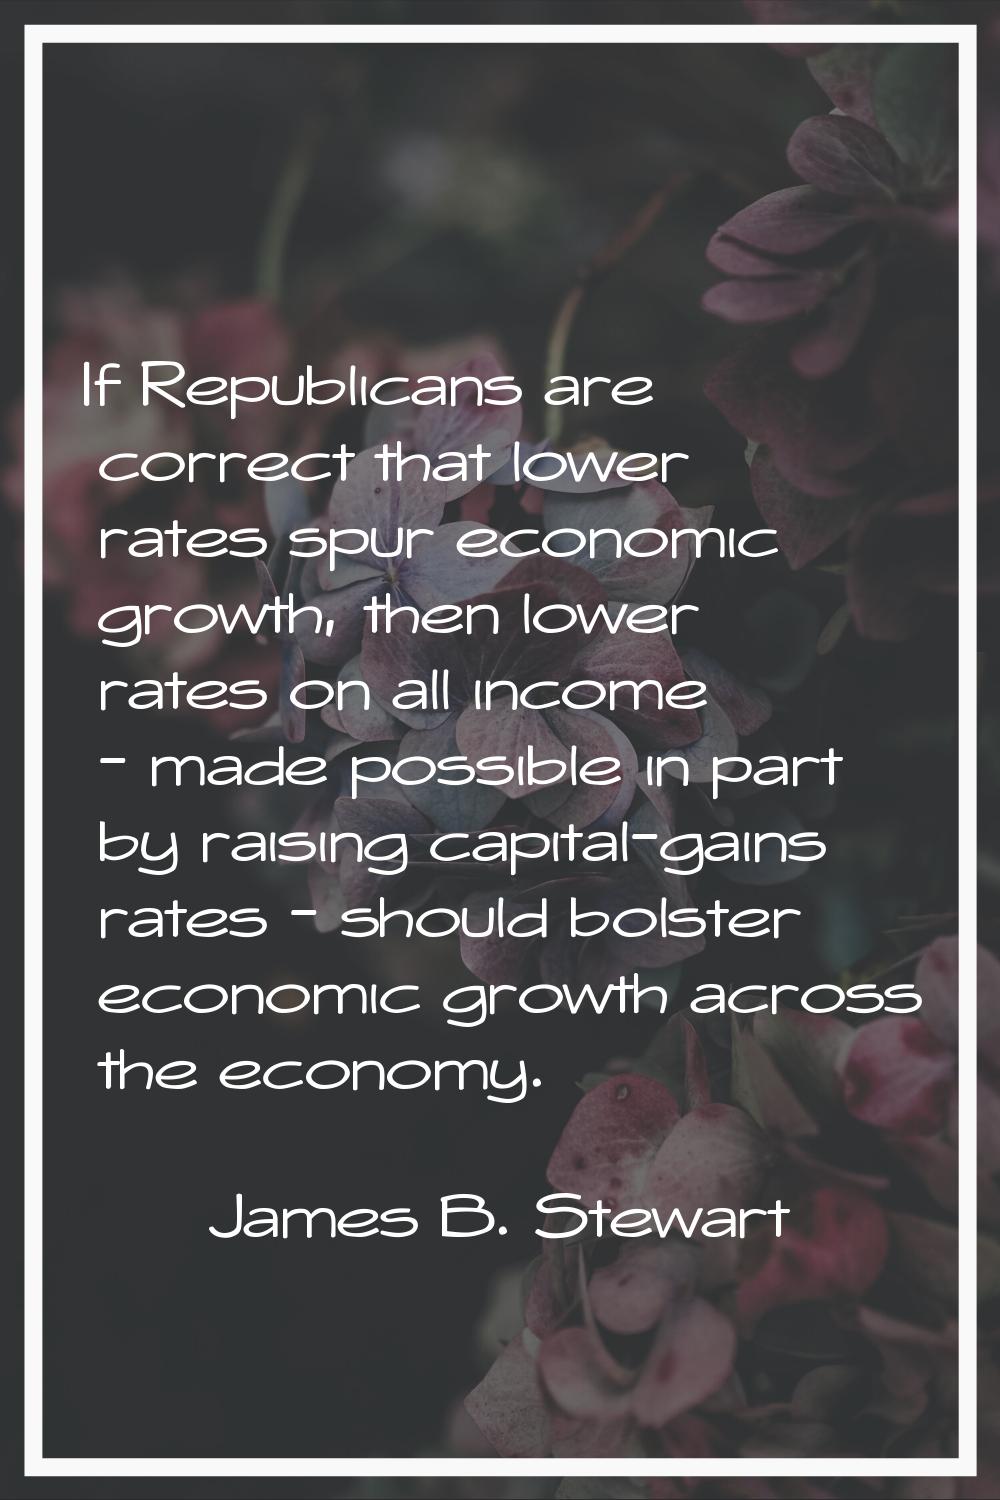 If Republicans are correct that lower rates spur economic growth, then lower rates on all income - 